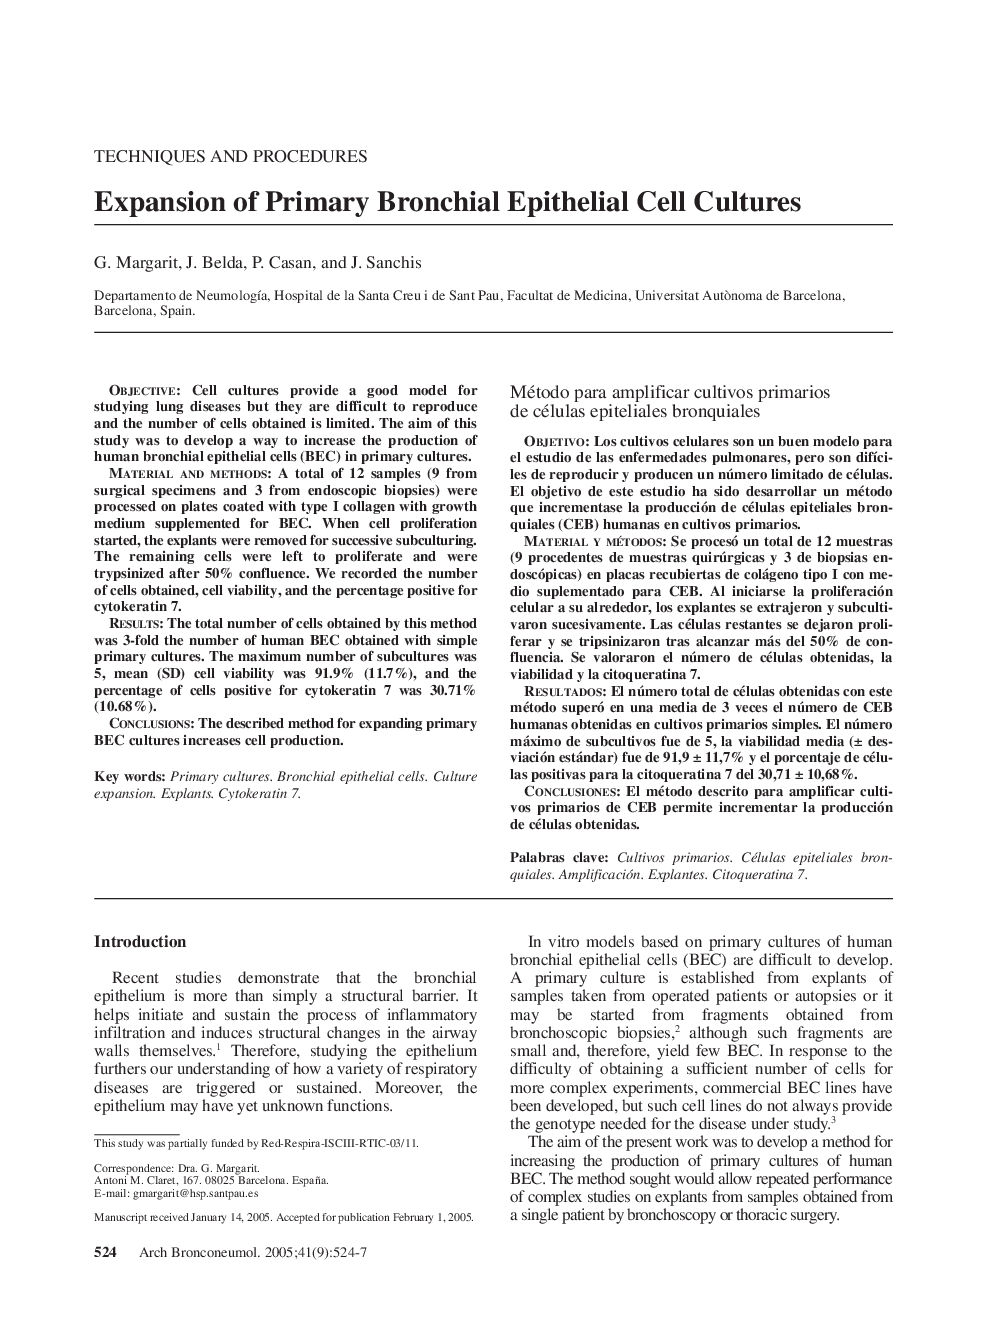 Expansion of Primary Bronchial Epithelial Cell Cultures